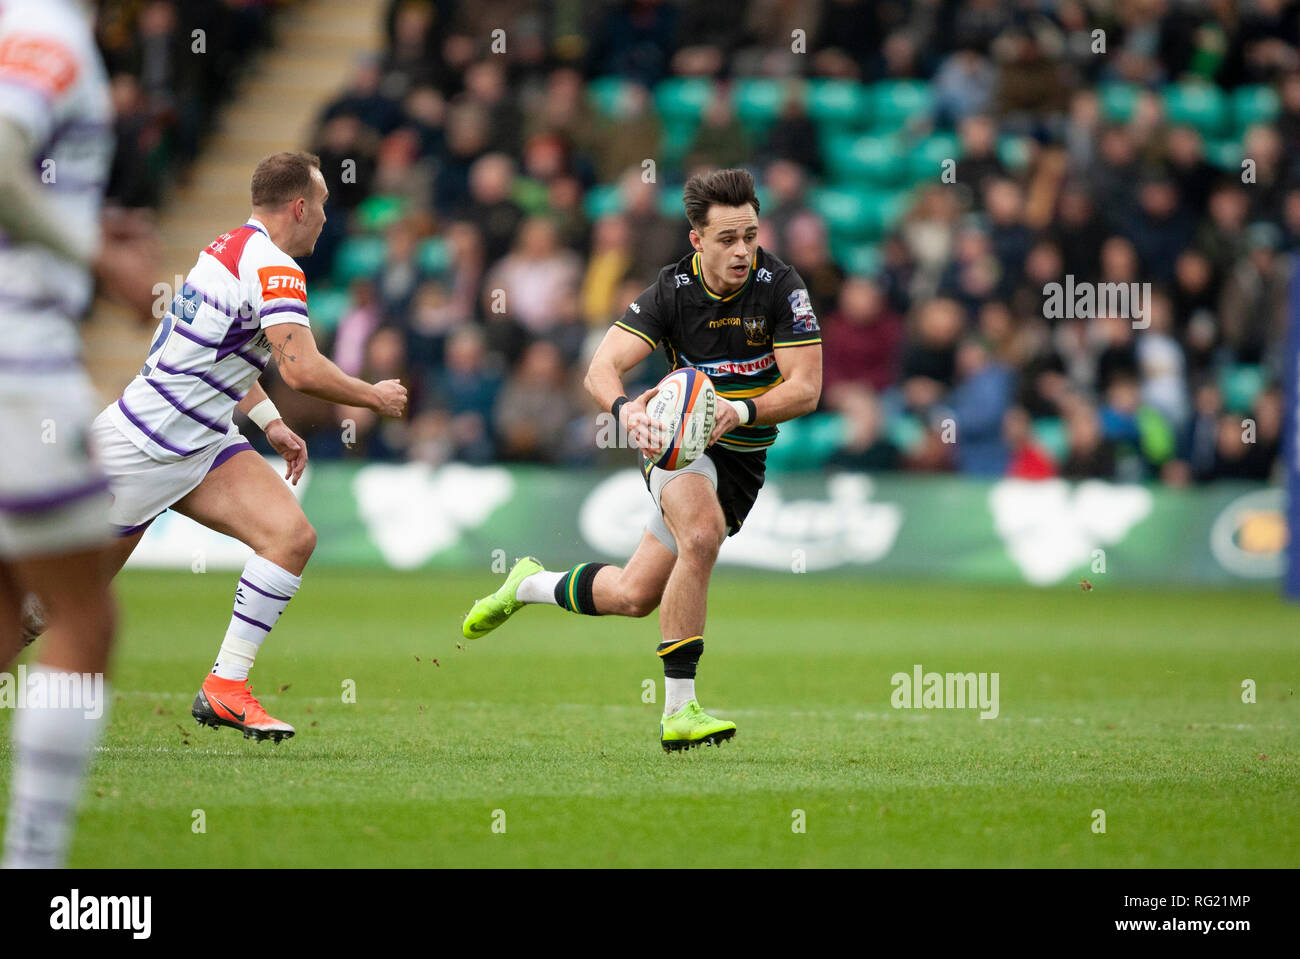 Northampton, UK. 26th January 2019. Tom Collins of Northampton Saints runs with the ball during the Premiership Rugby Cup match between Northampton Saints and Leicester Tigers. Andrew Taylor/Alamy Live News Stock Photo